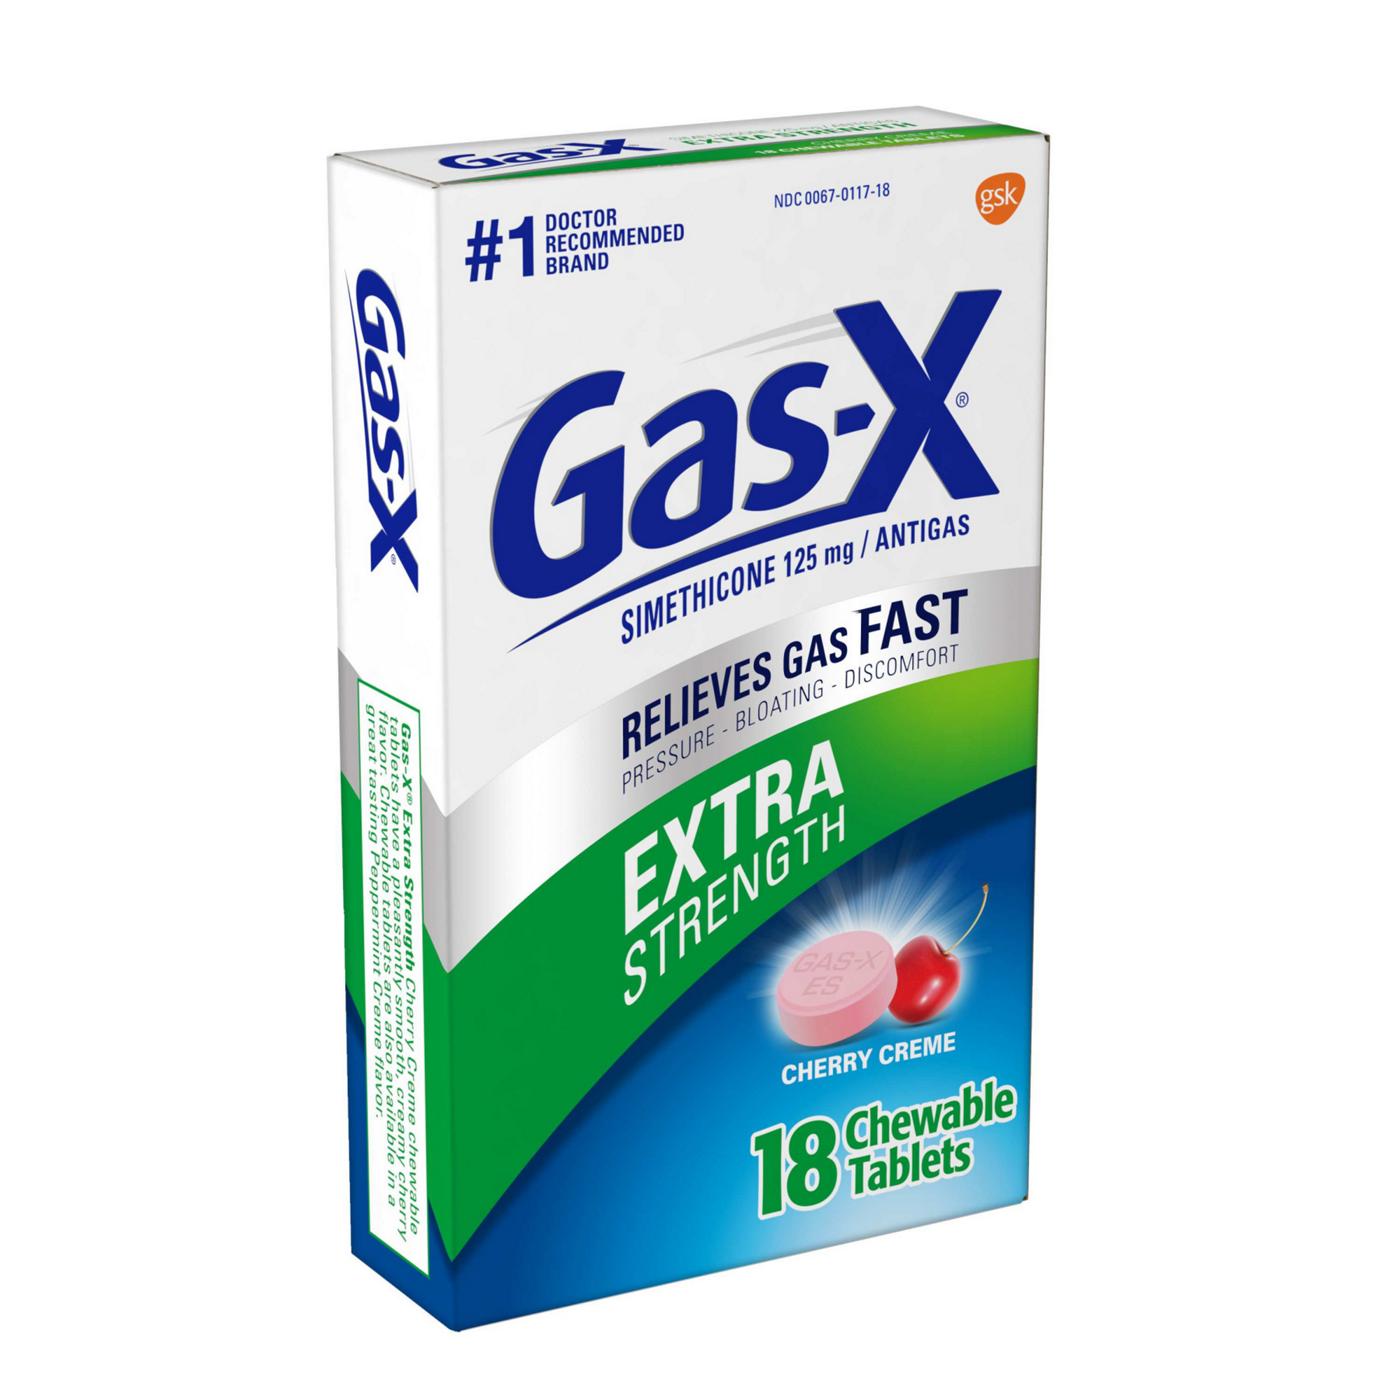 Gas-X Extra Strength Chewable Tablets - Cherry Creme; image 2 of 8